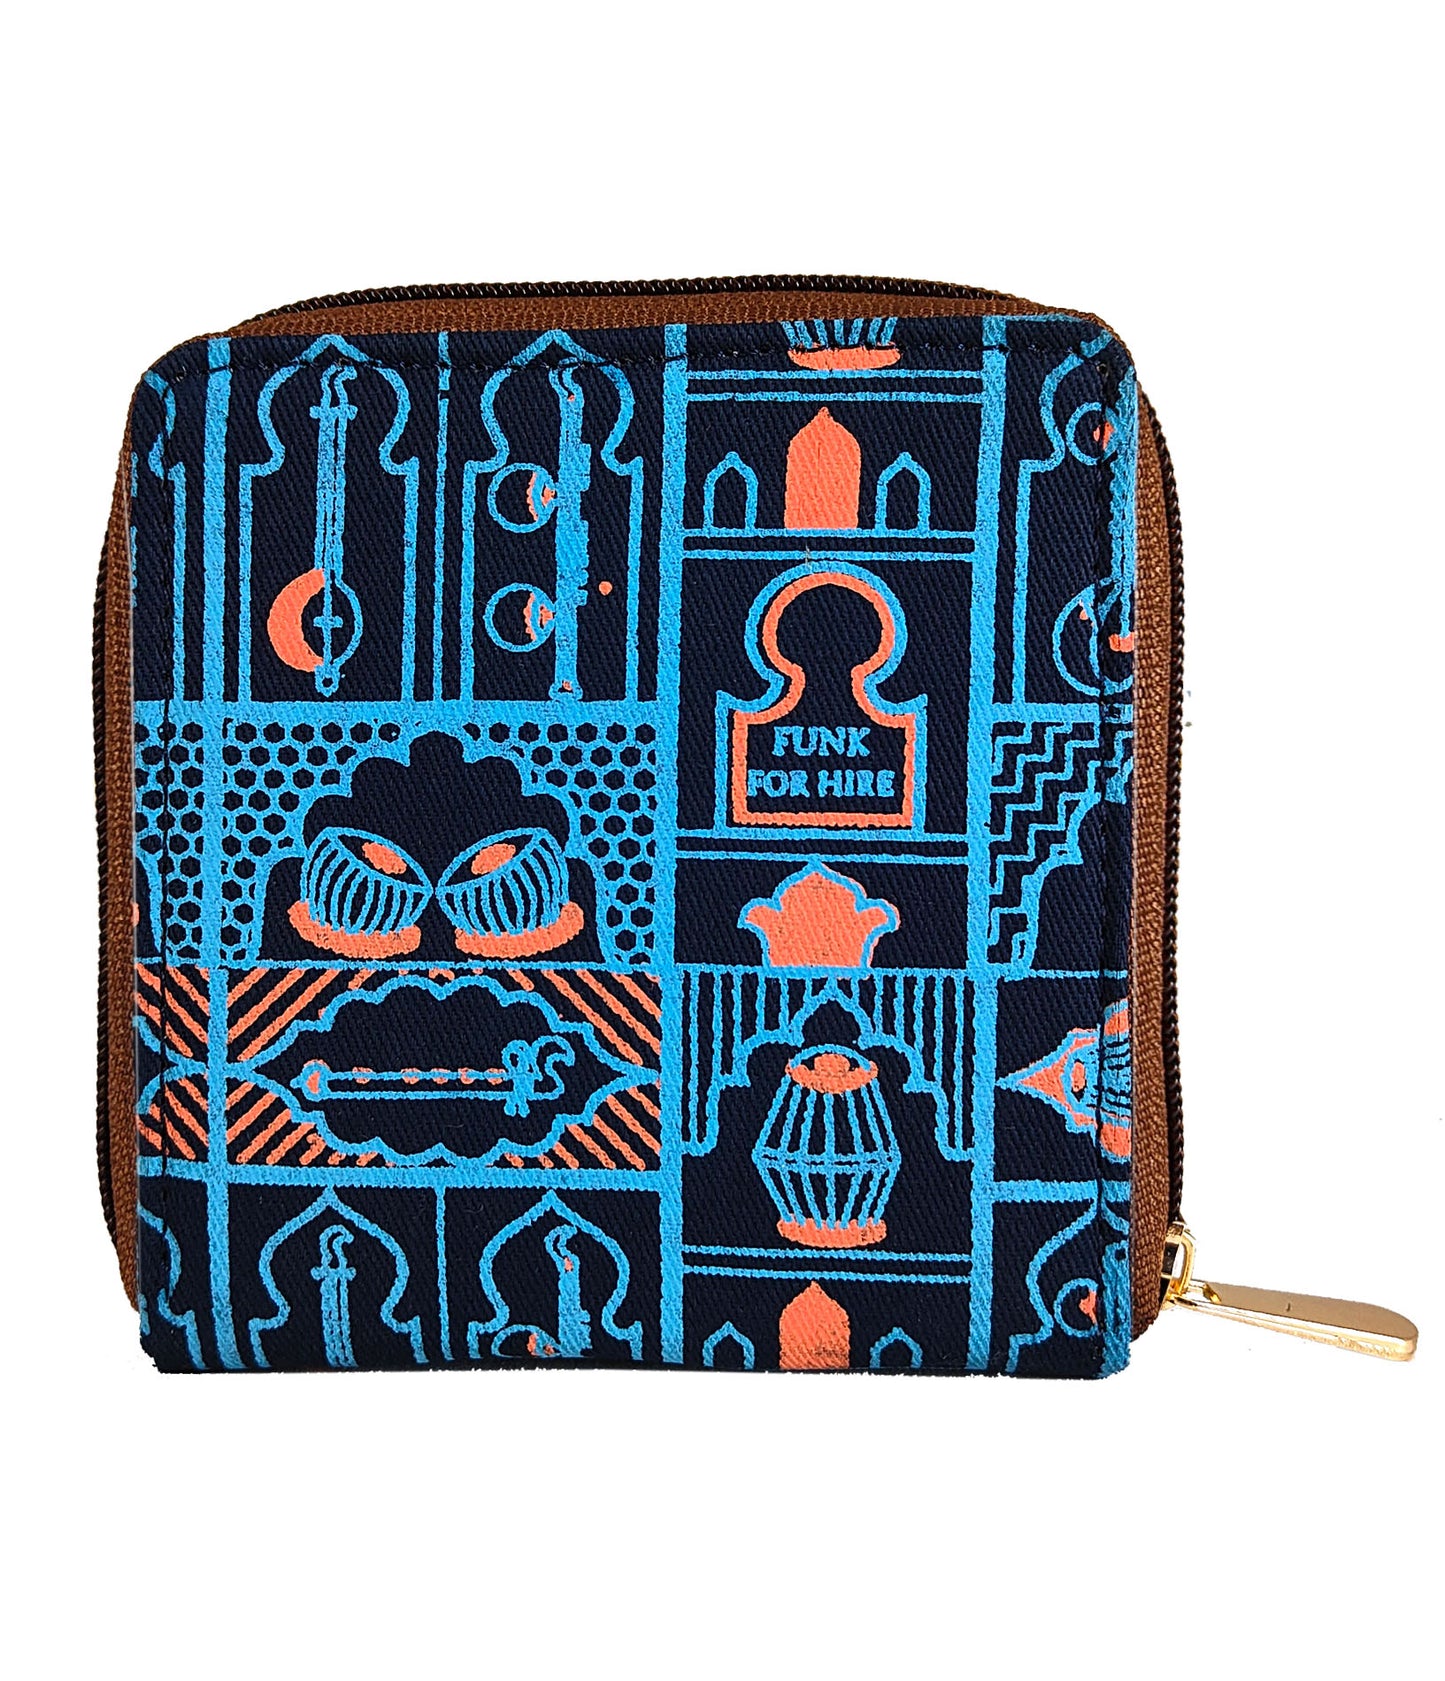 Music Wall Navy Square Wallet